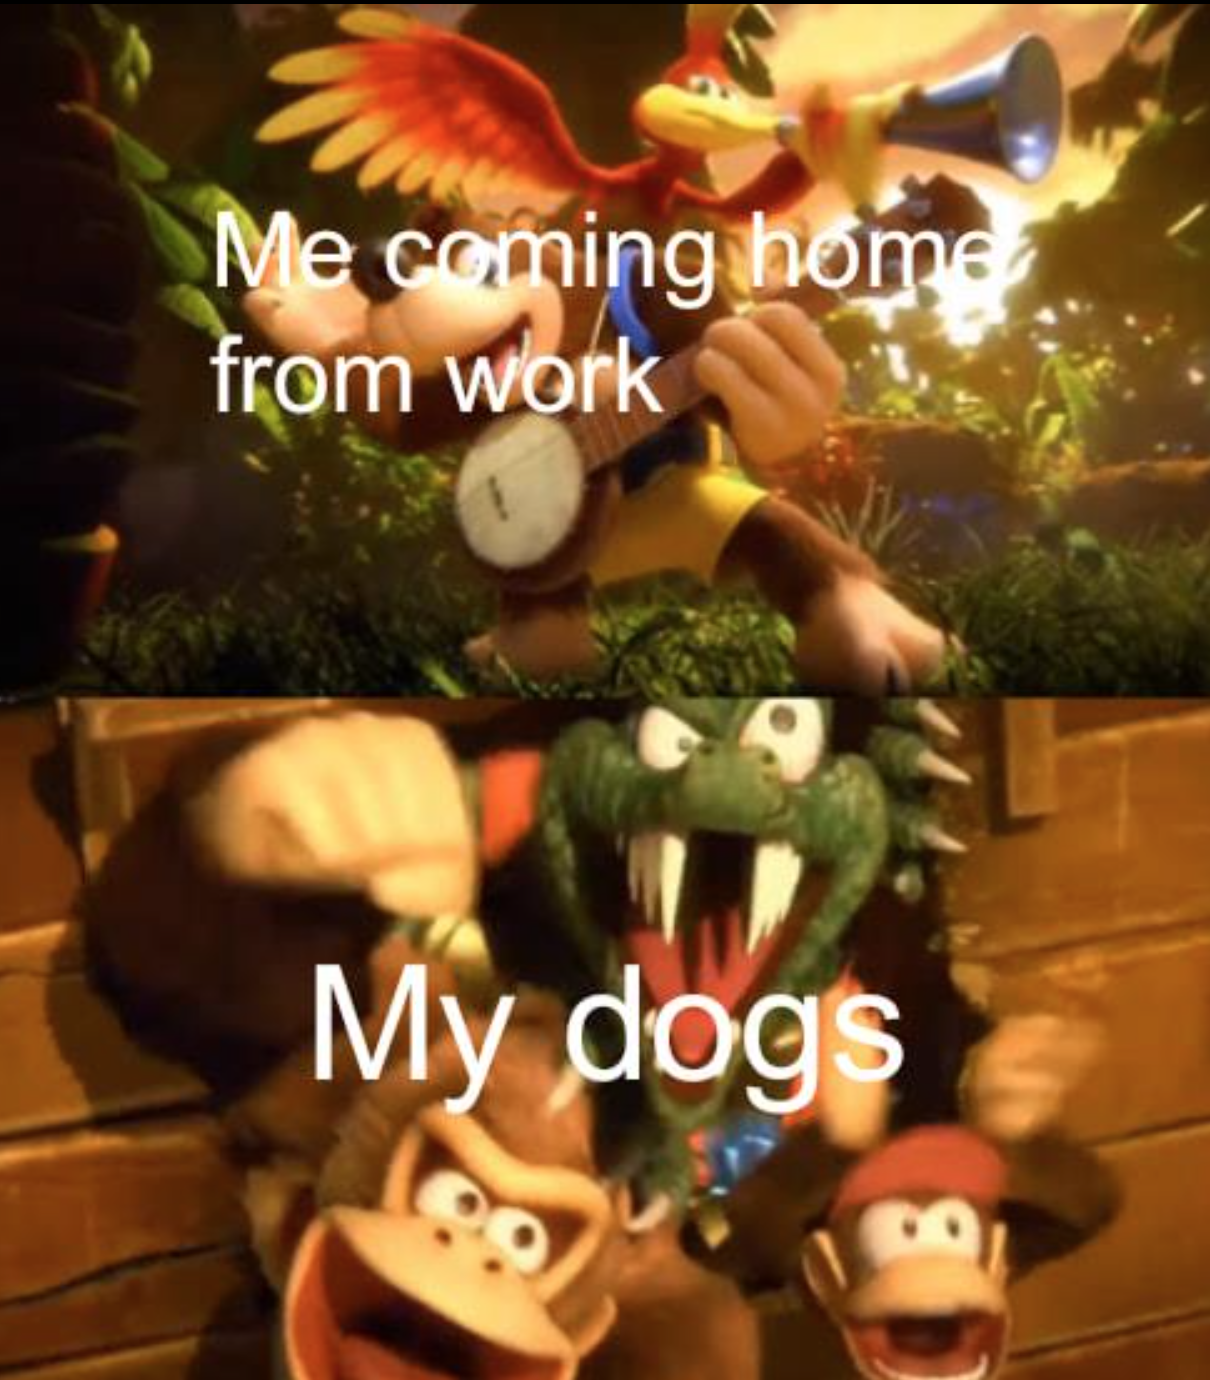 gaming memes - banjo kazooie smash reveal - Me coming home from work My dogs